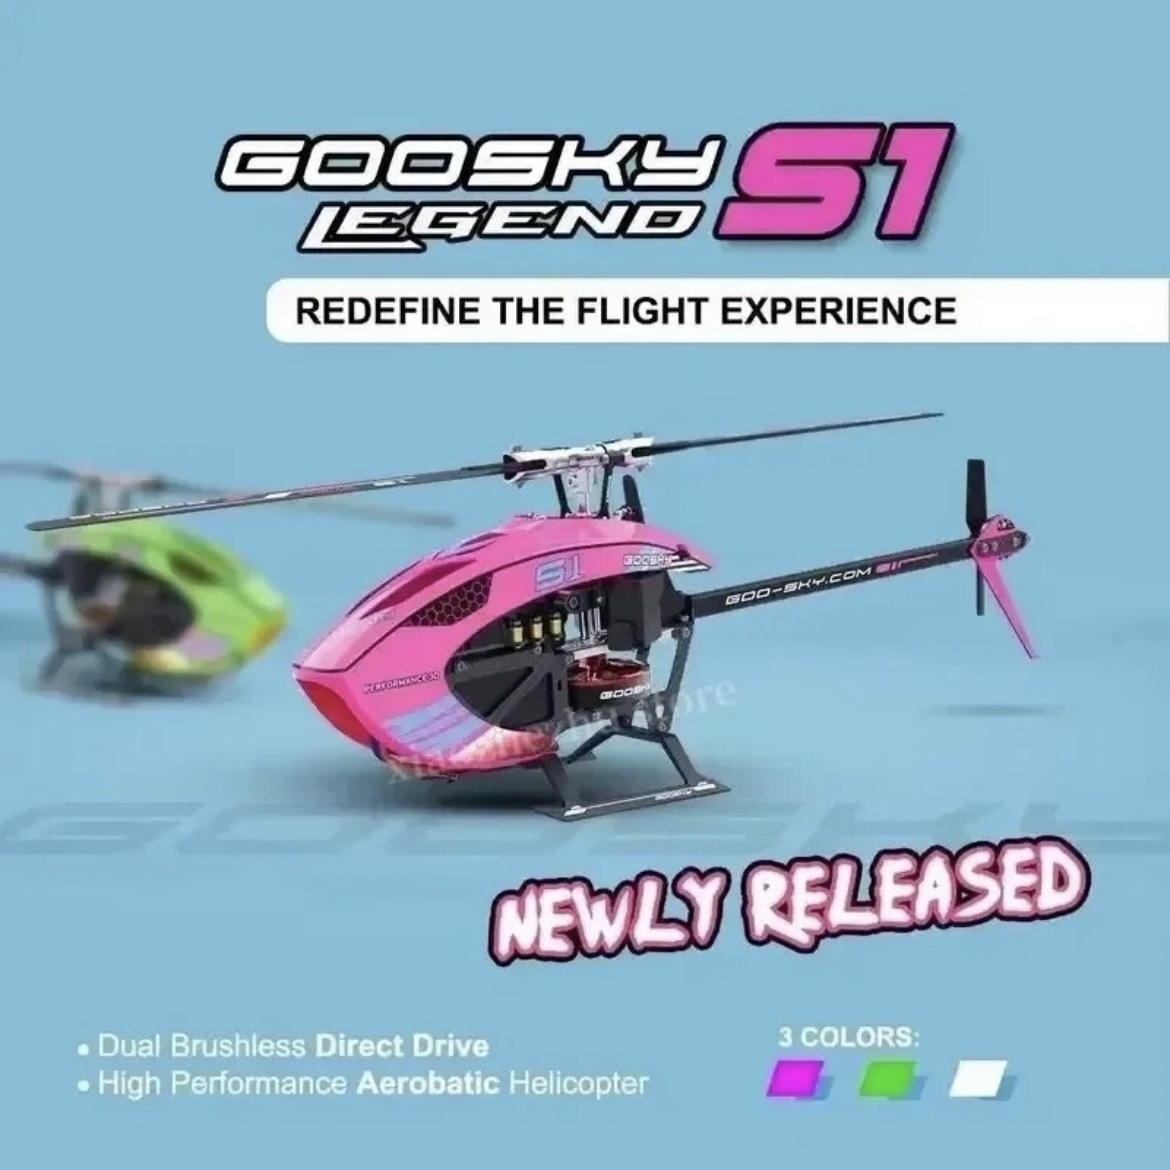  height performance 6 axis Gyro installing GOOSKY LEGEND S1 helicopter ( pink ) radio-controller RChe rear black 3D. leaf Futaba JR